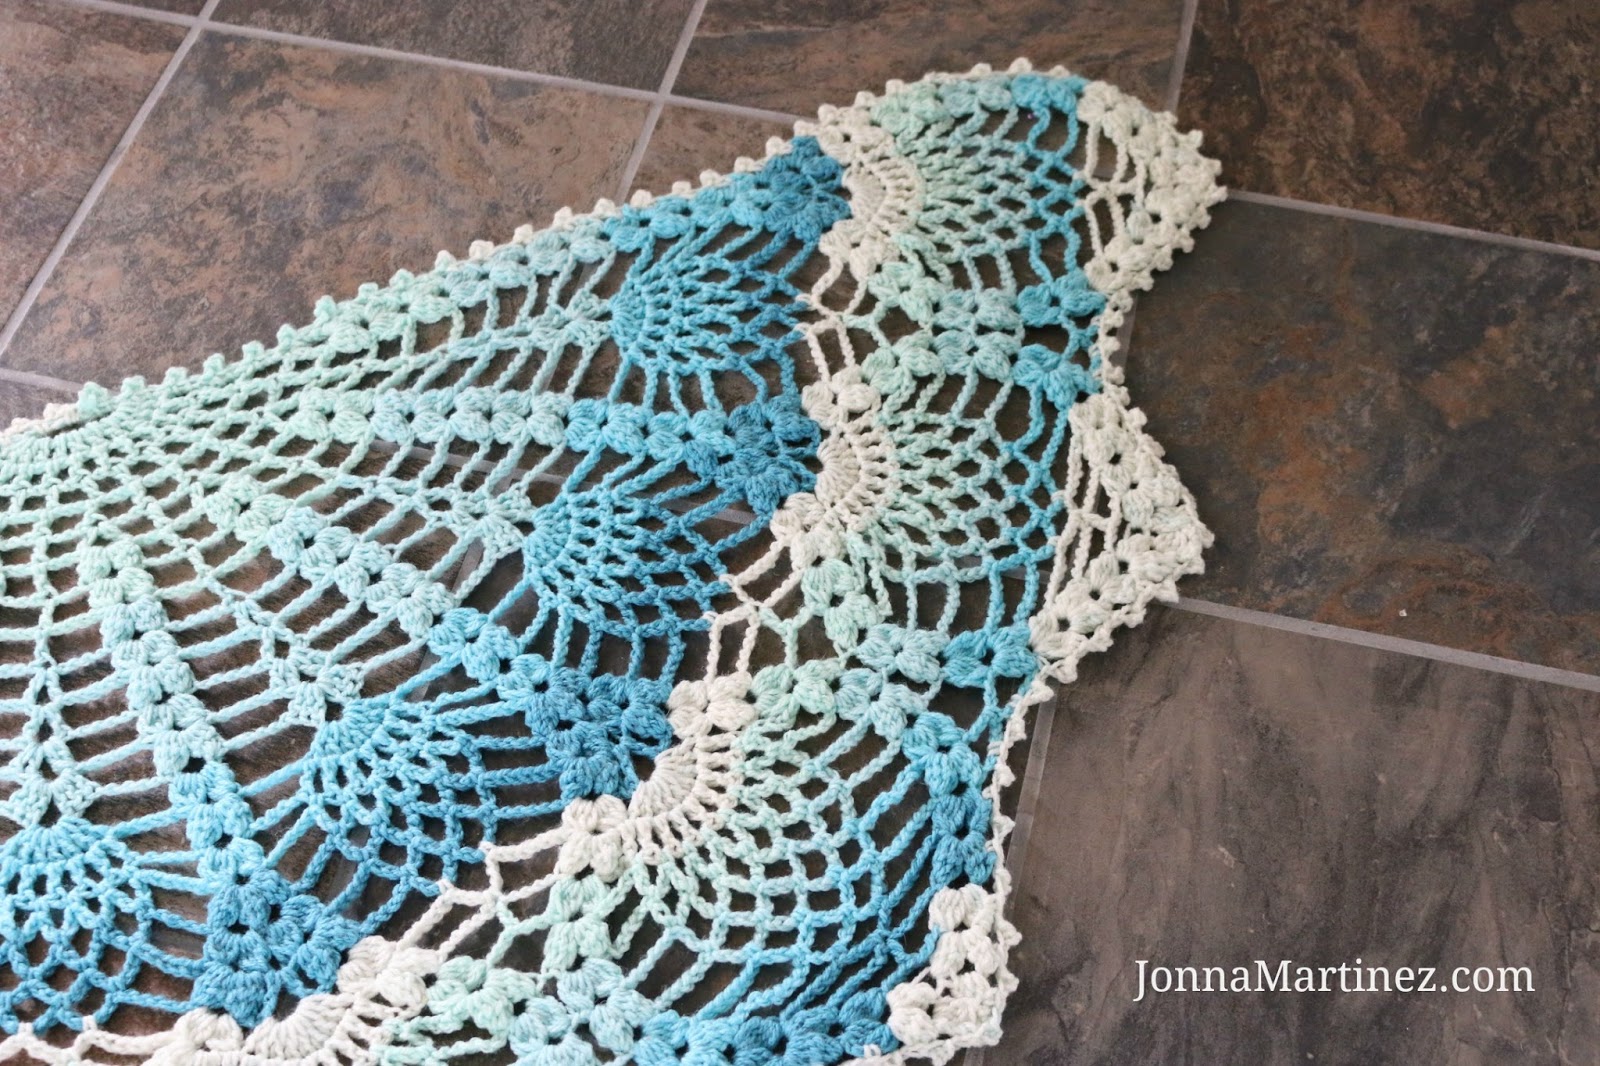 How To Crochet Pineapple Peacock Shawl – Easy Stitch Tutorial + Free Video For Beginners